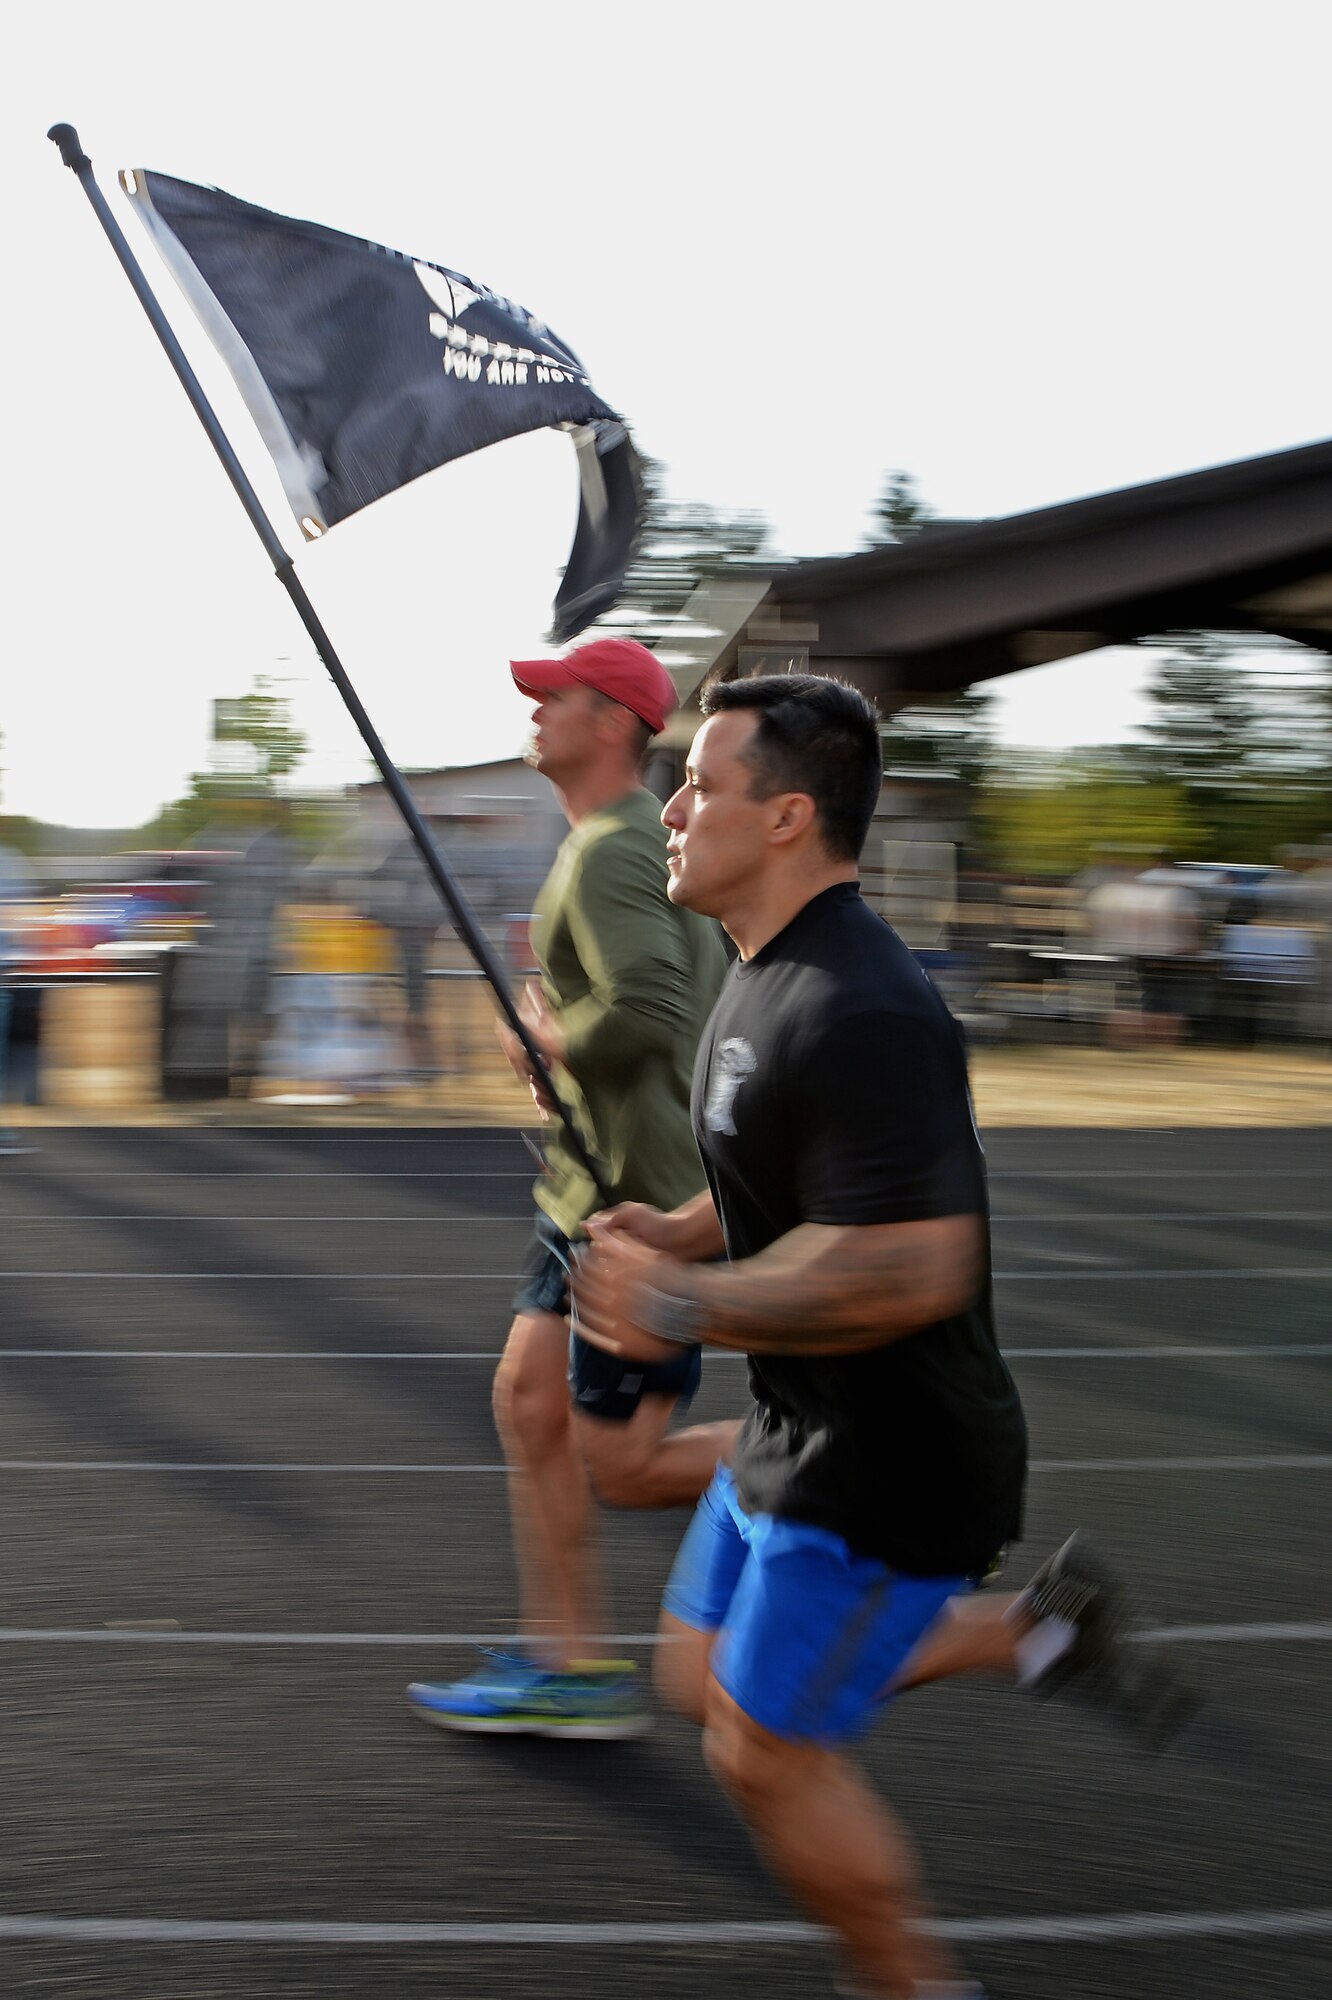 Staff Sgt. Daniel Aguirre, 446th Security Forces Squadron fire team member, run at the McChord outdoor track during the 24-Hour POW/MIA Run Sept. 14, 2017, at Joint Base Lewis-McChord, Wash.